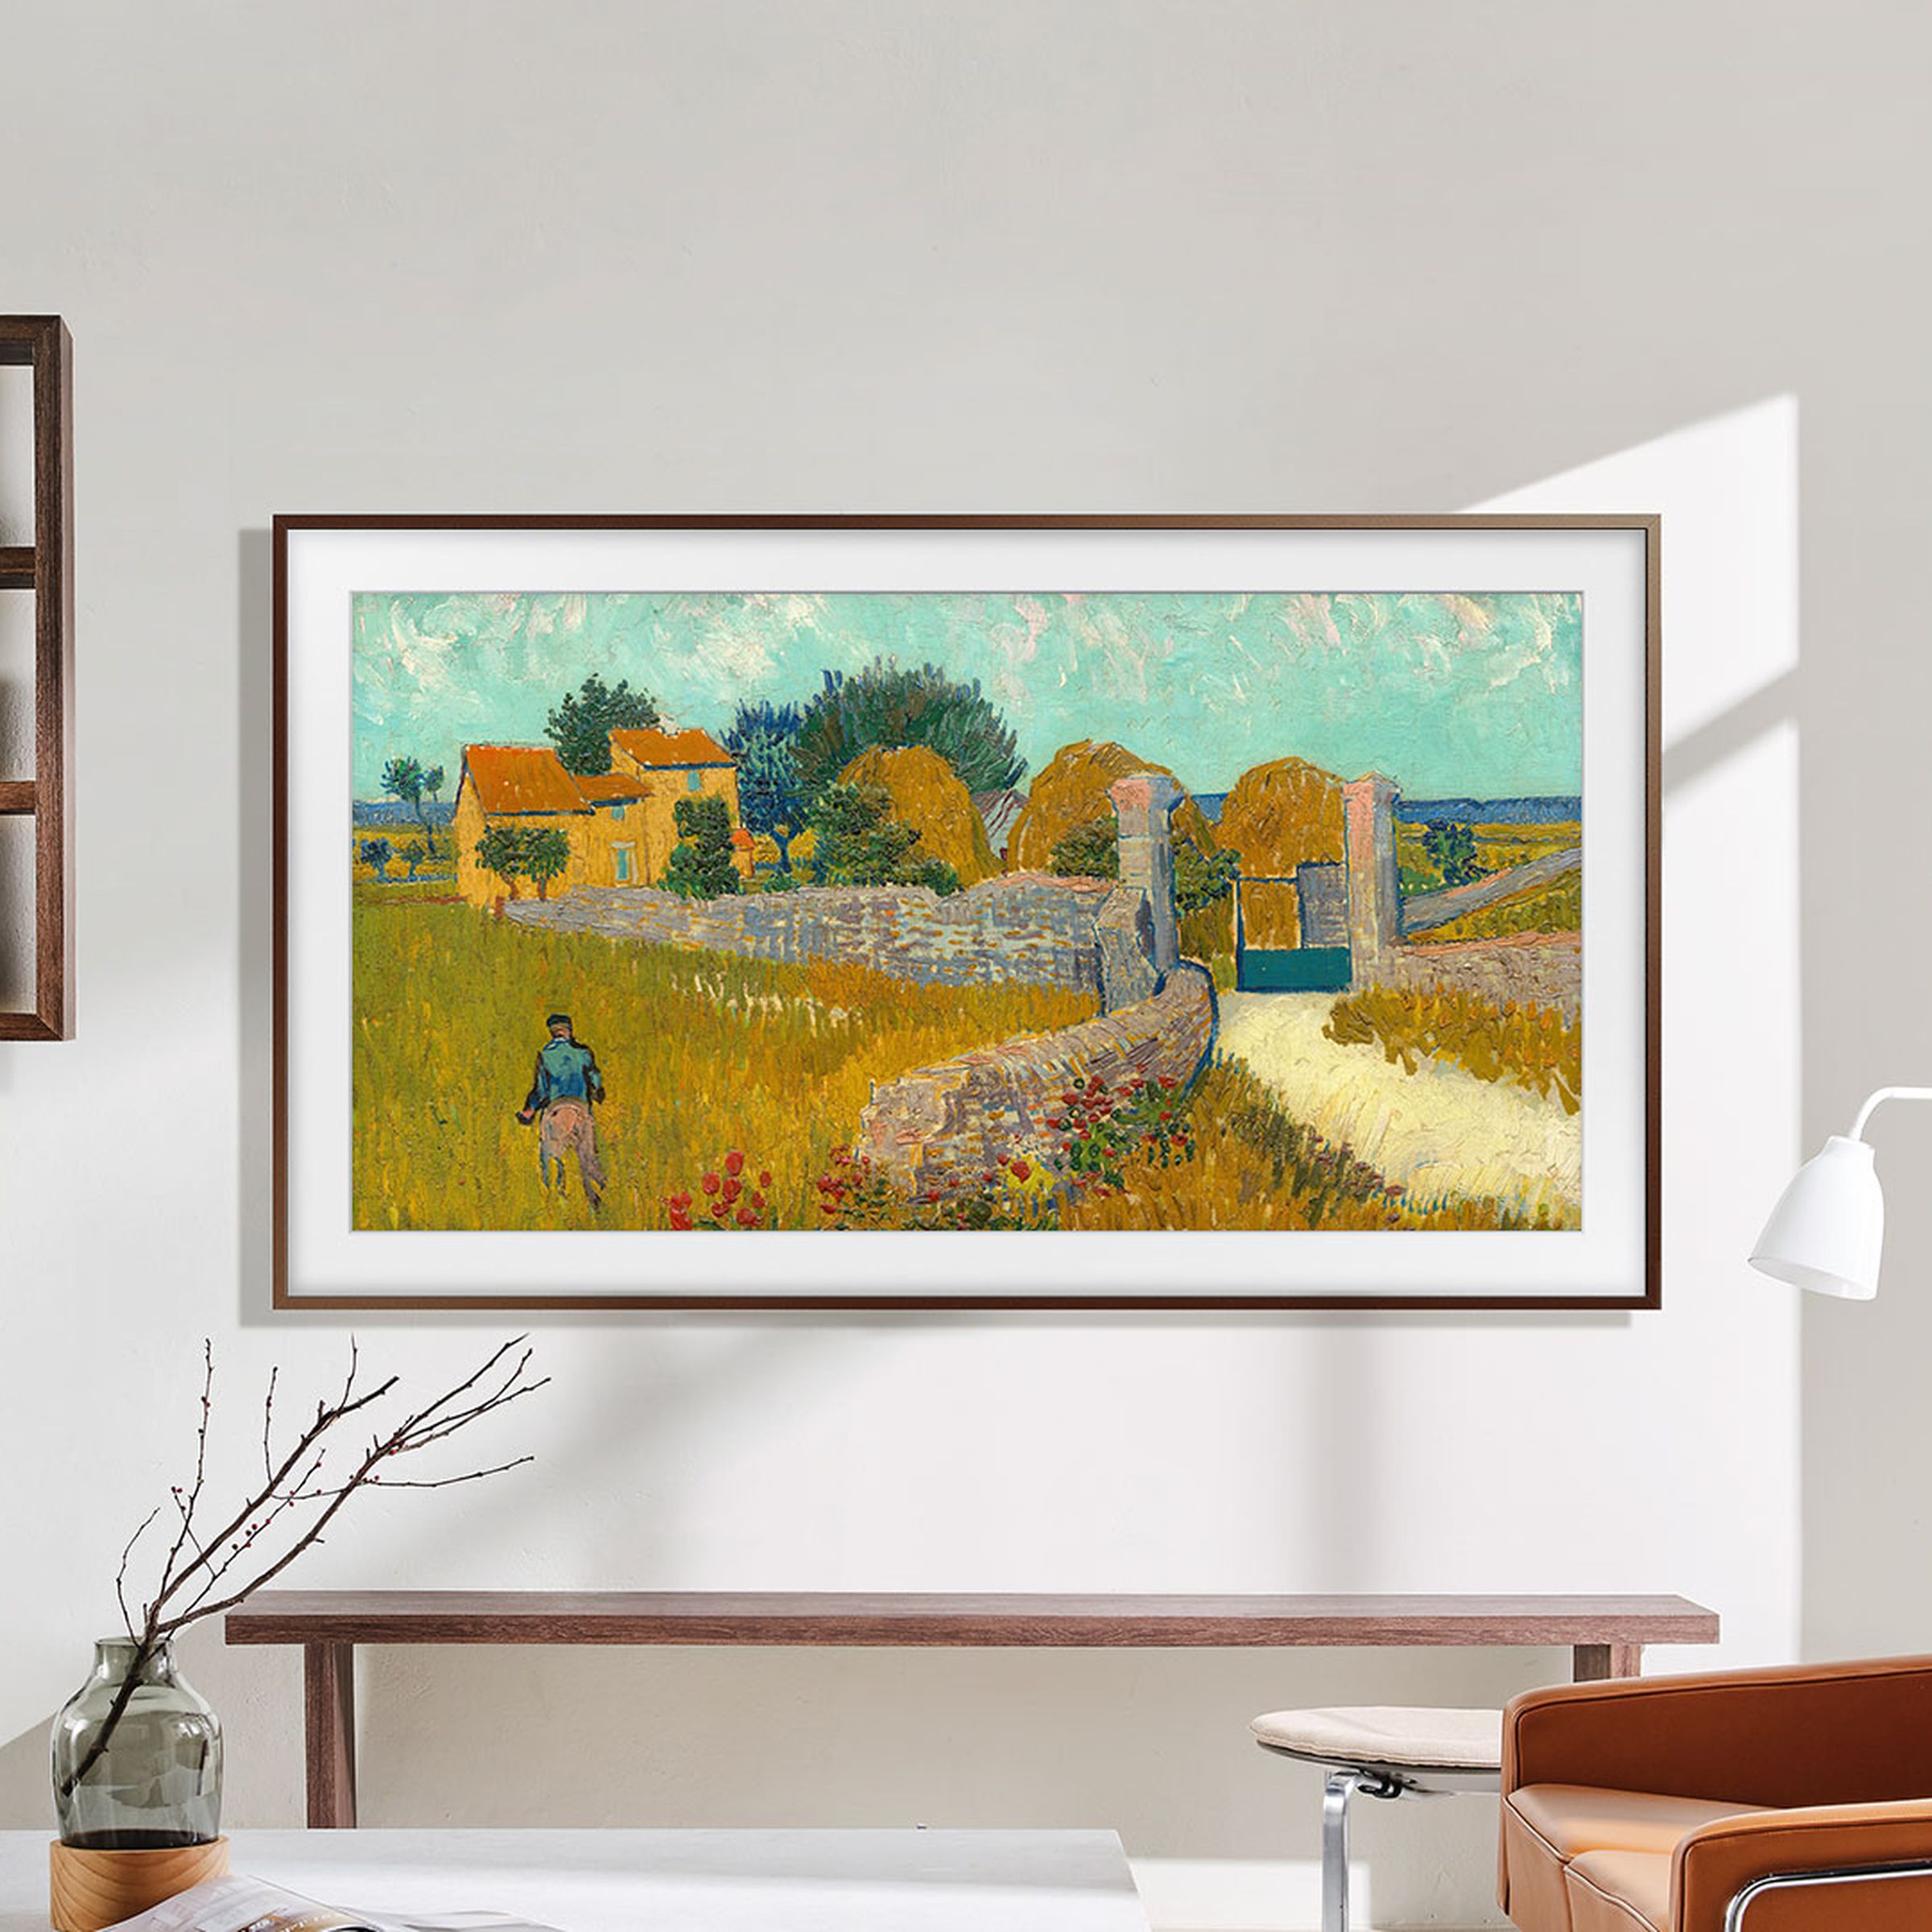 Samsung’s The Frame TV hanging up on a wall displaying artwork.